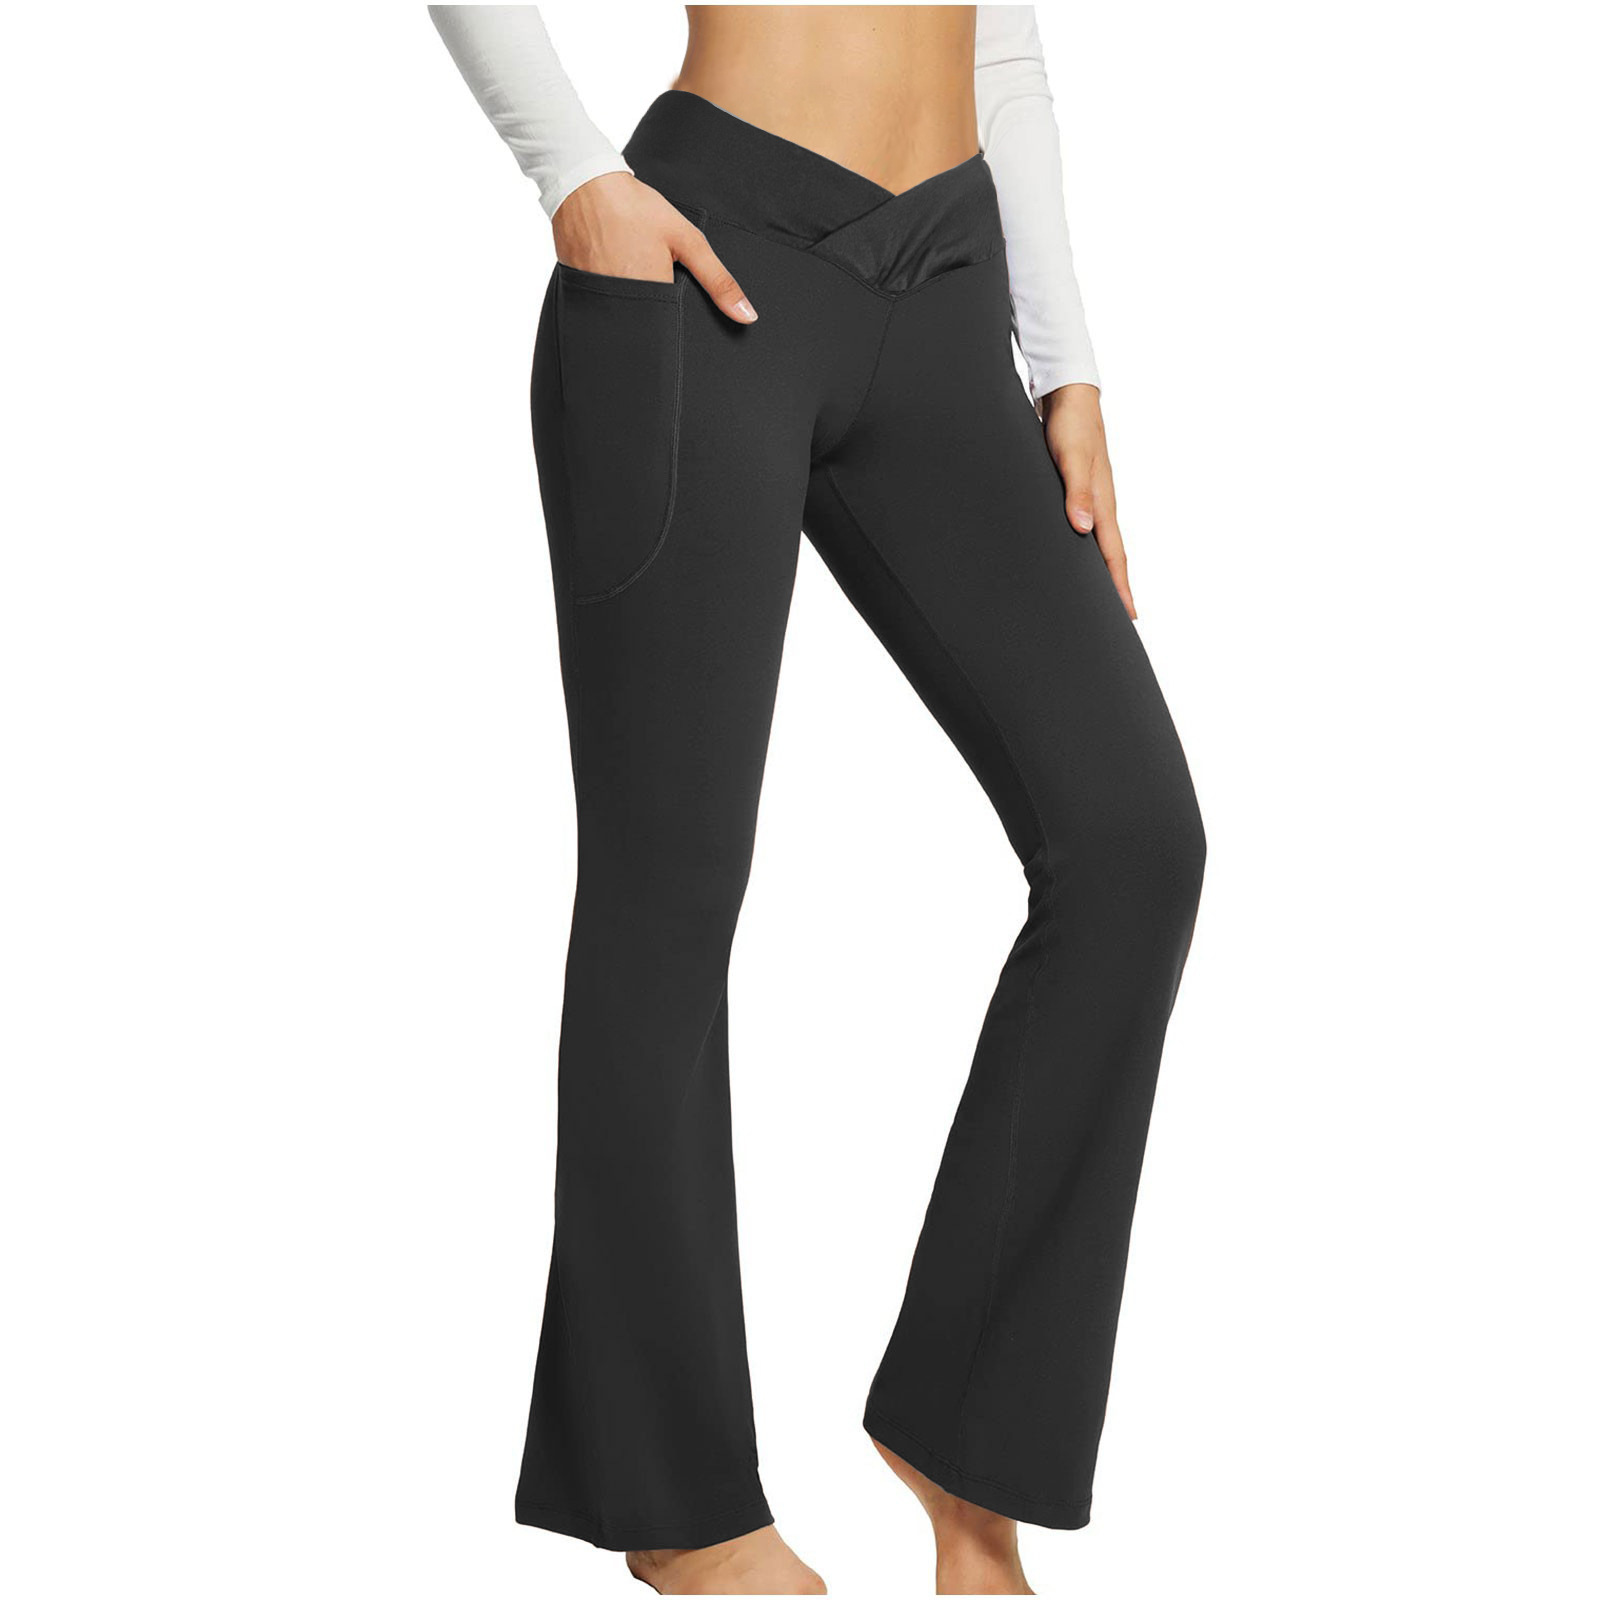 Women's Autumn and Winter Solid Color Casual Micro-lapel High Waist Slim Wide Leg Yoga Fitness Pants Sweatpants